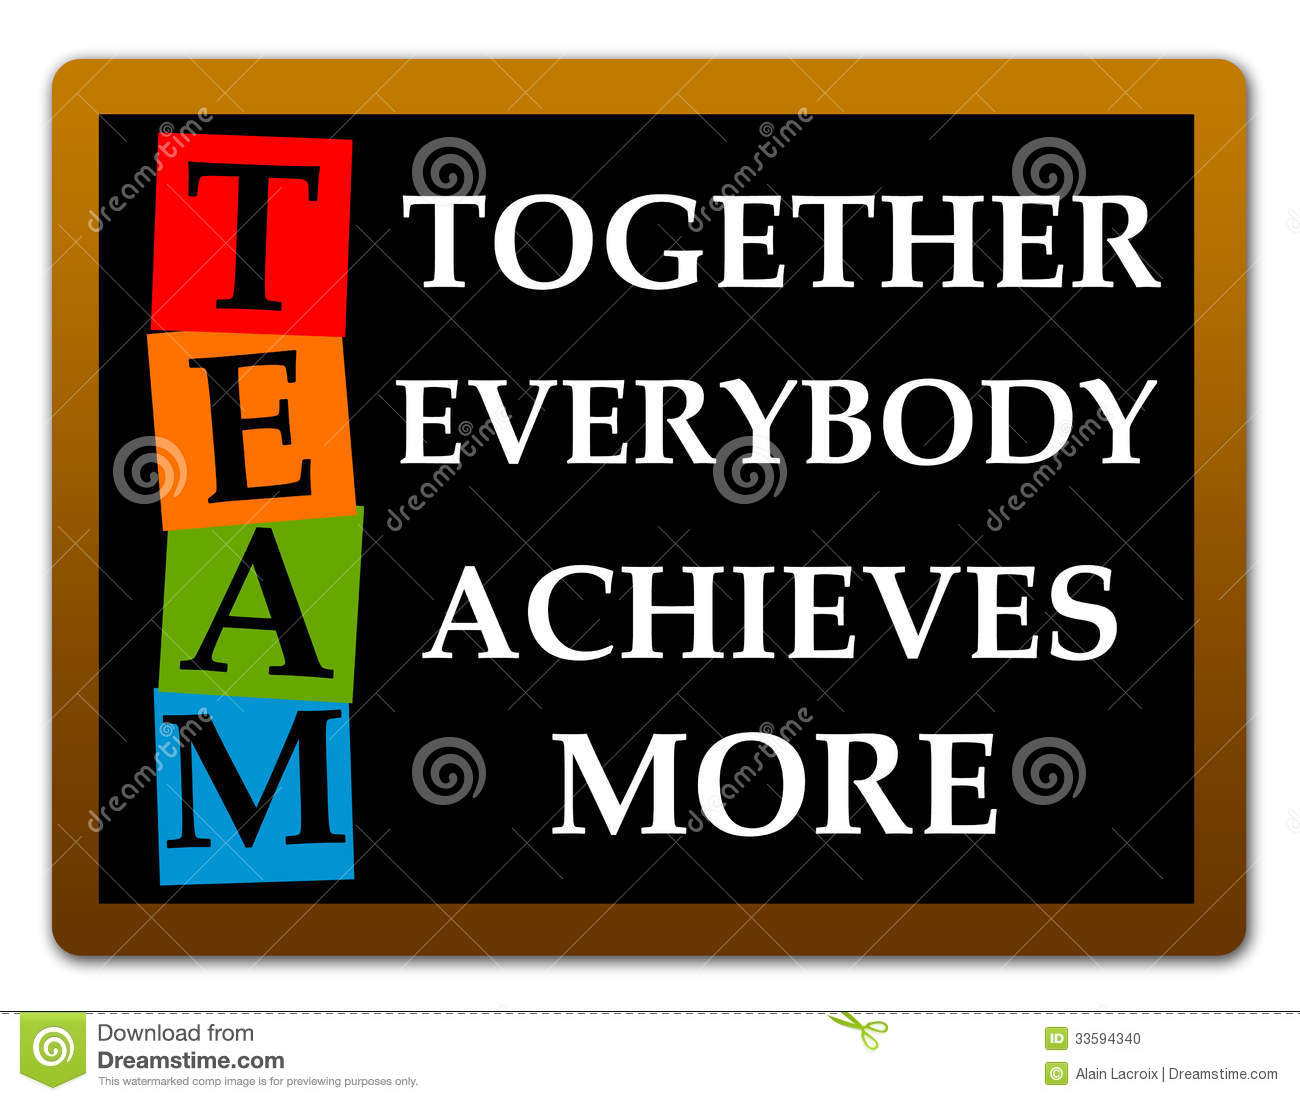 Achieving More When Everybody Works Together 